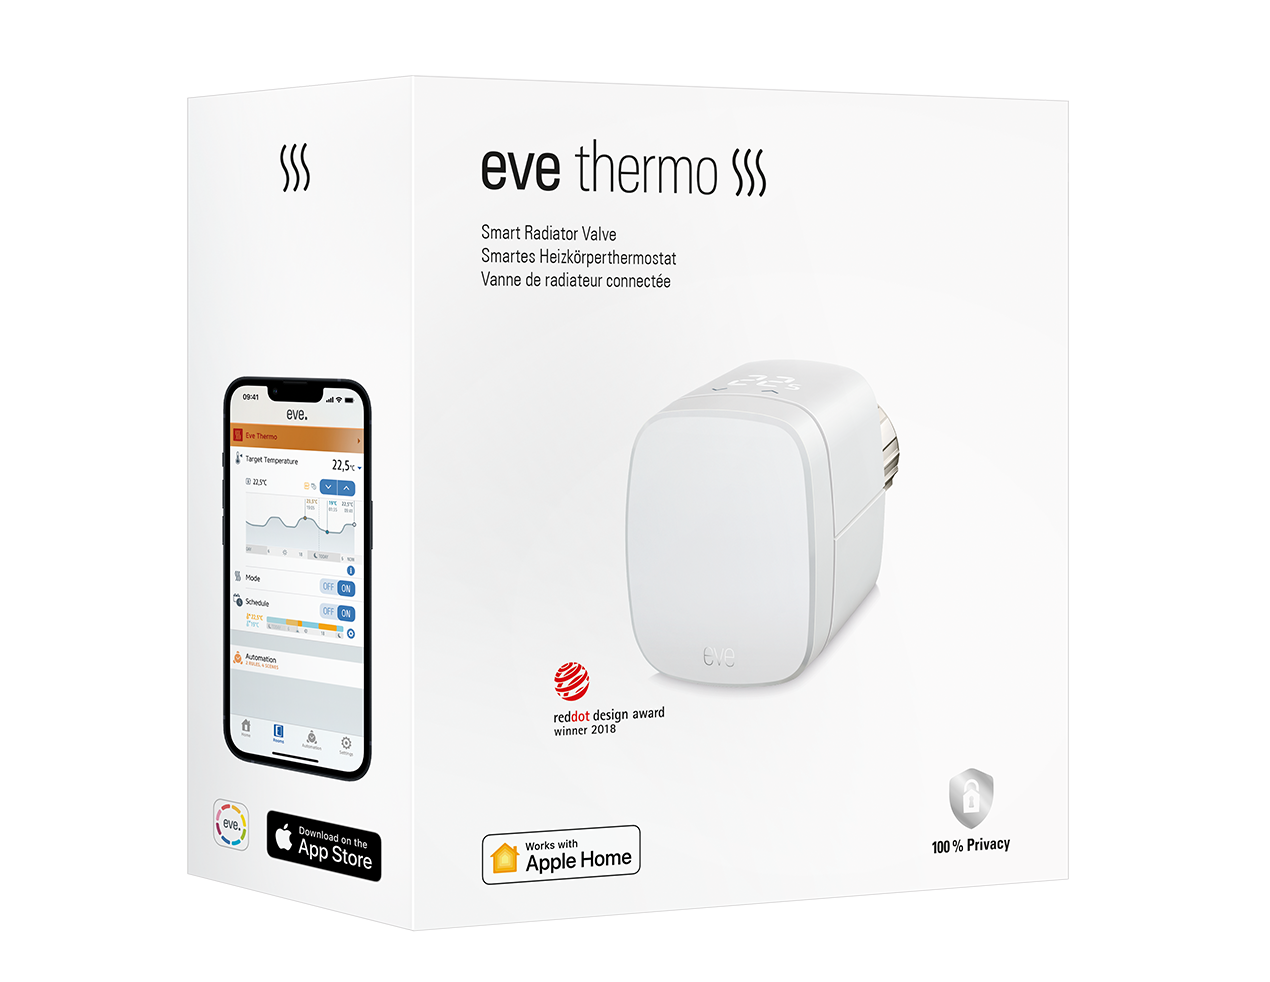 evanell° Smart Home Zigbee 3.0 Gateway - evanell° - Smart radiator valve  and climate assistant for your home